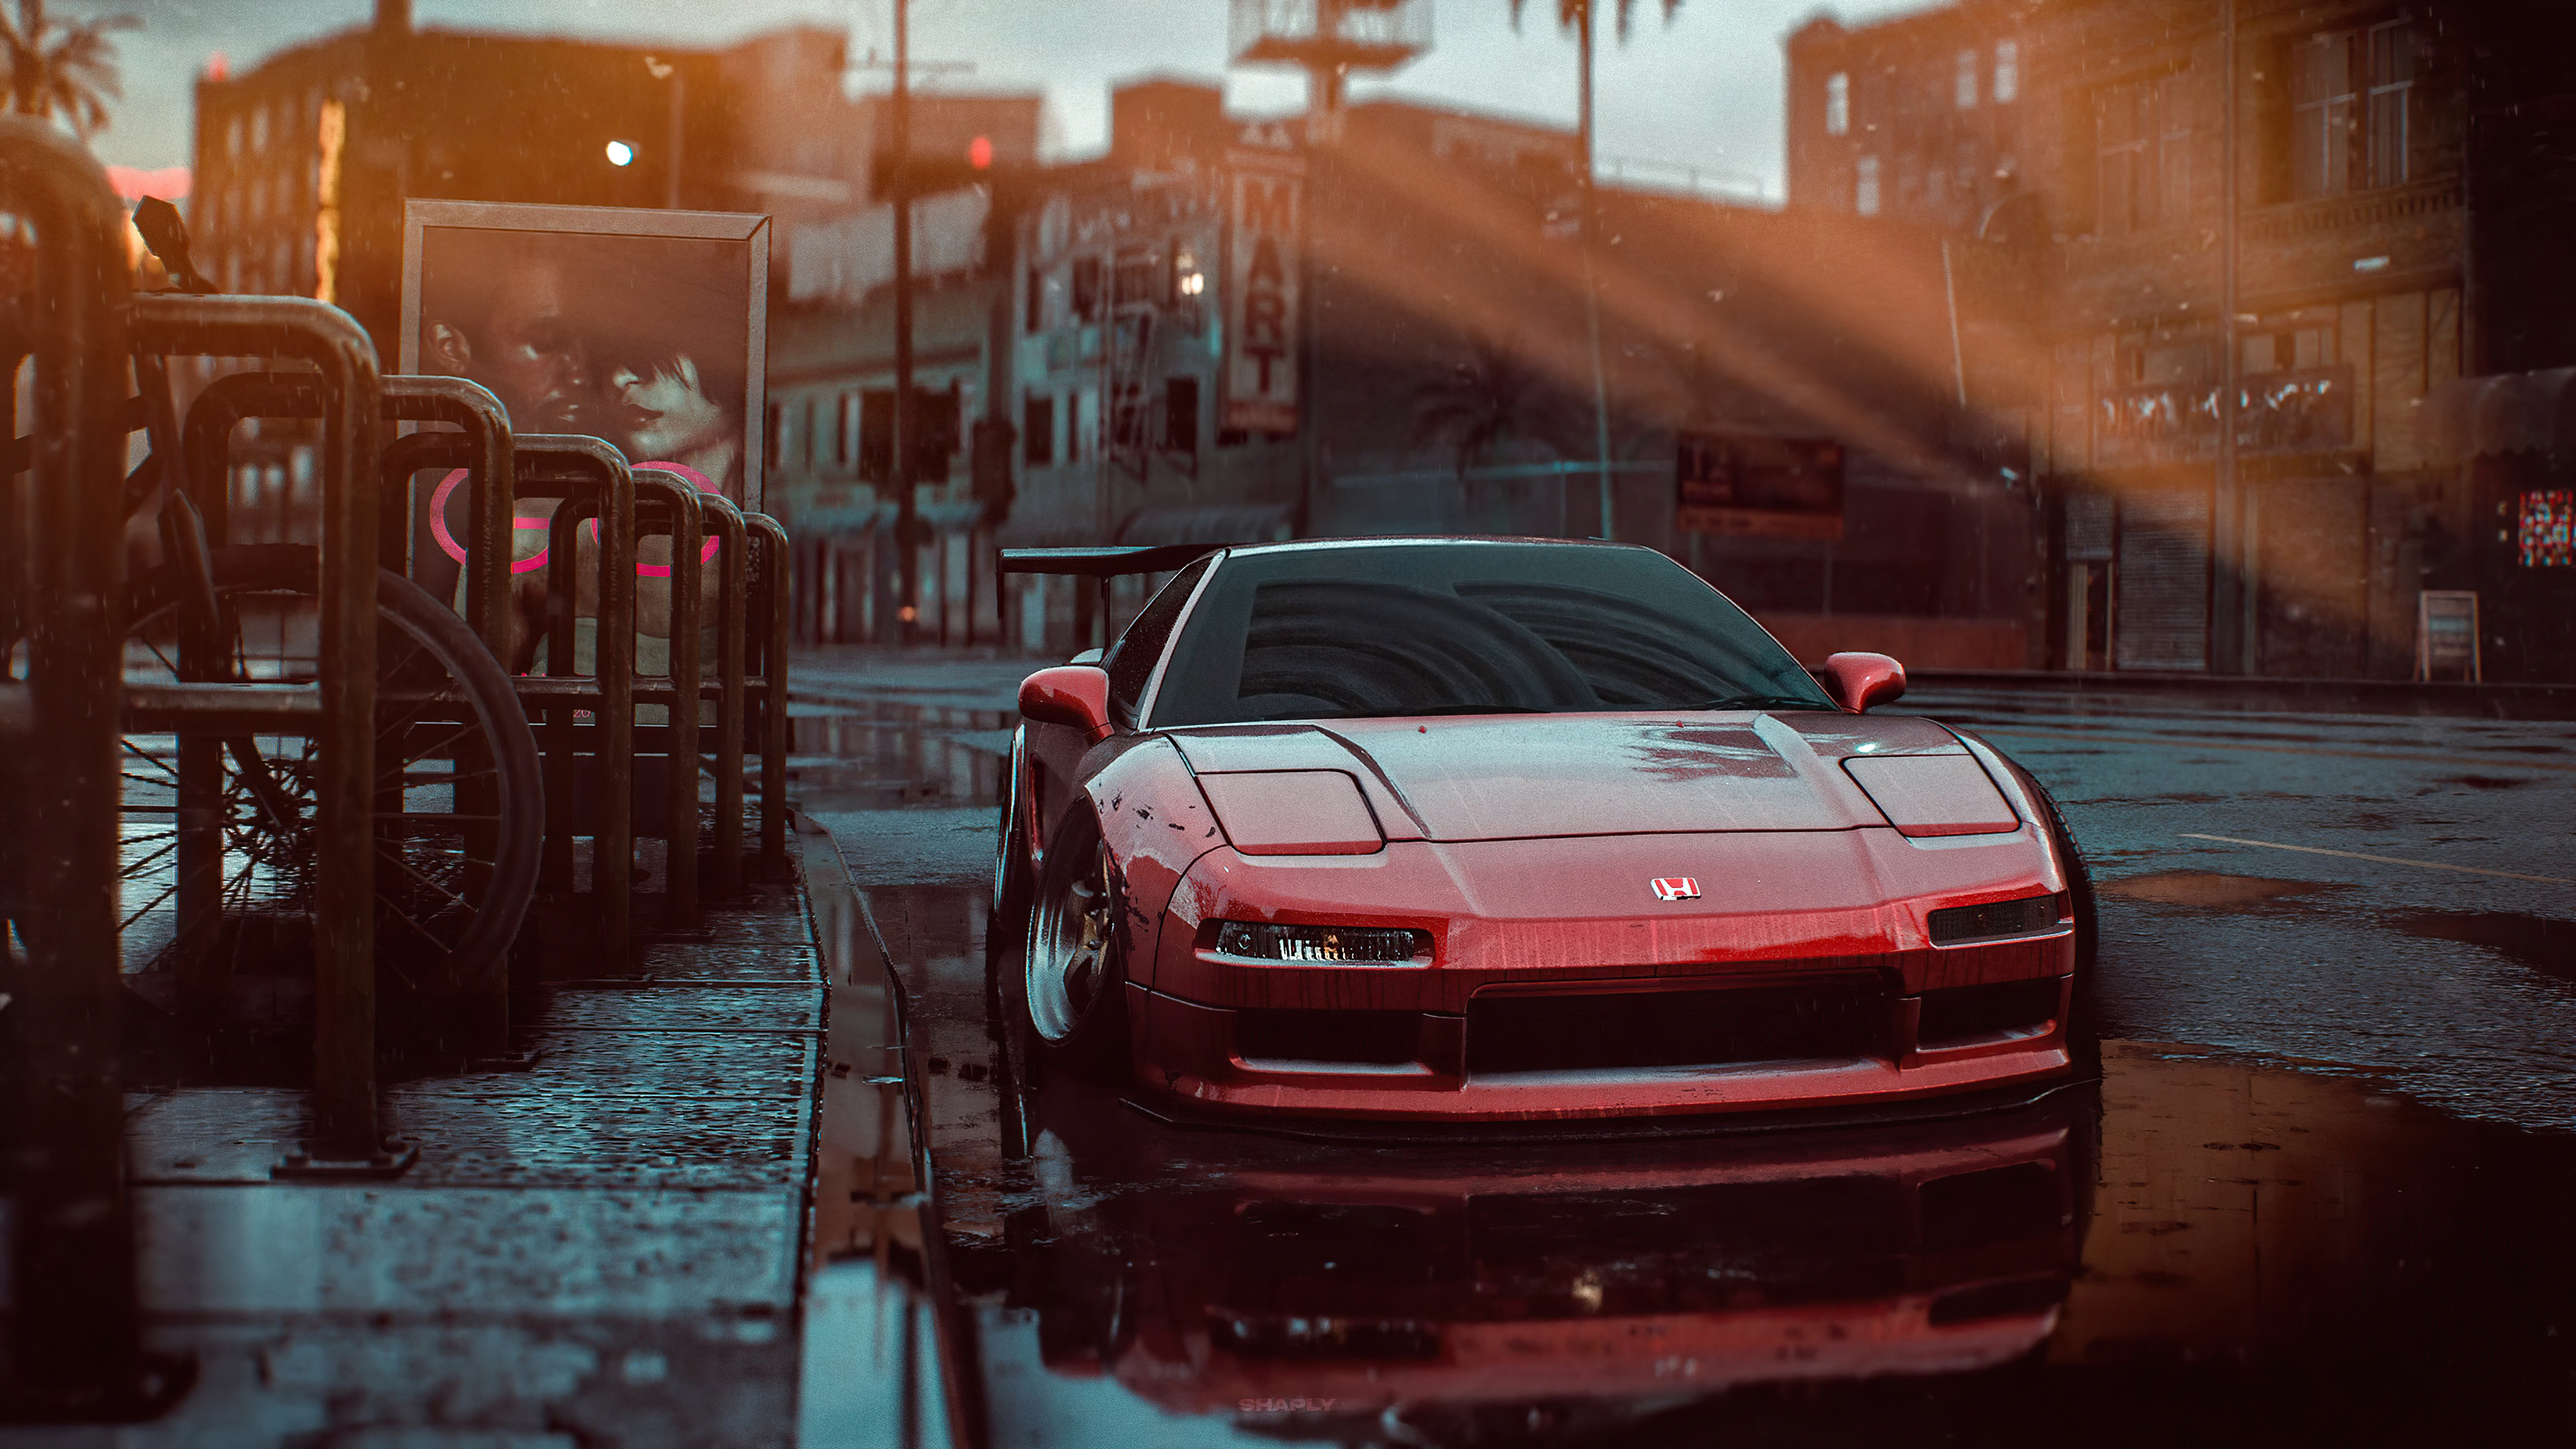 Honda NSX in Need for Speed, 4K HD gaming wallpapers, High-speed excitement, Automotive glory, 3840x2160 4K Desktop